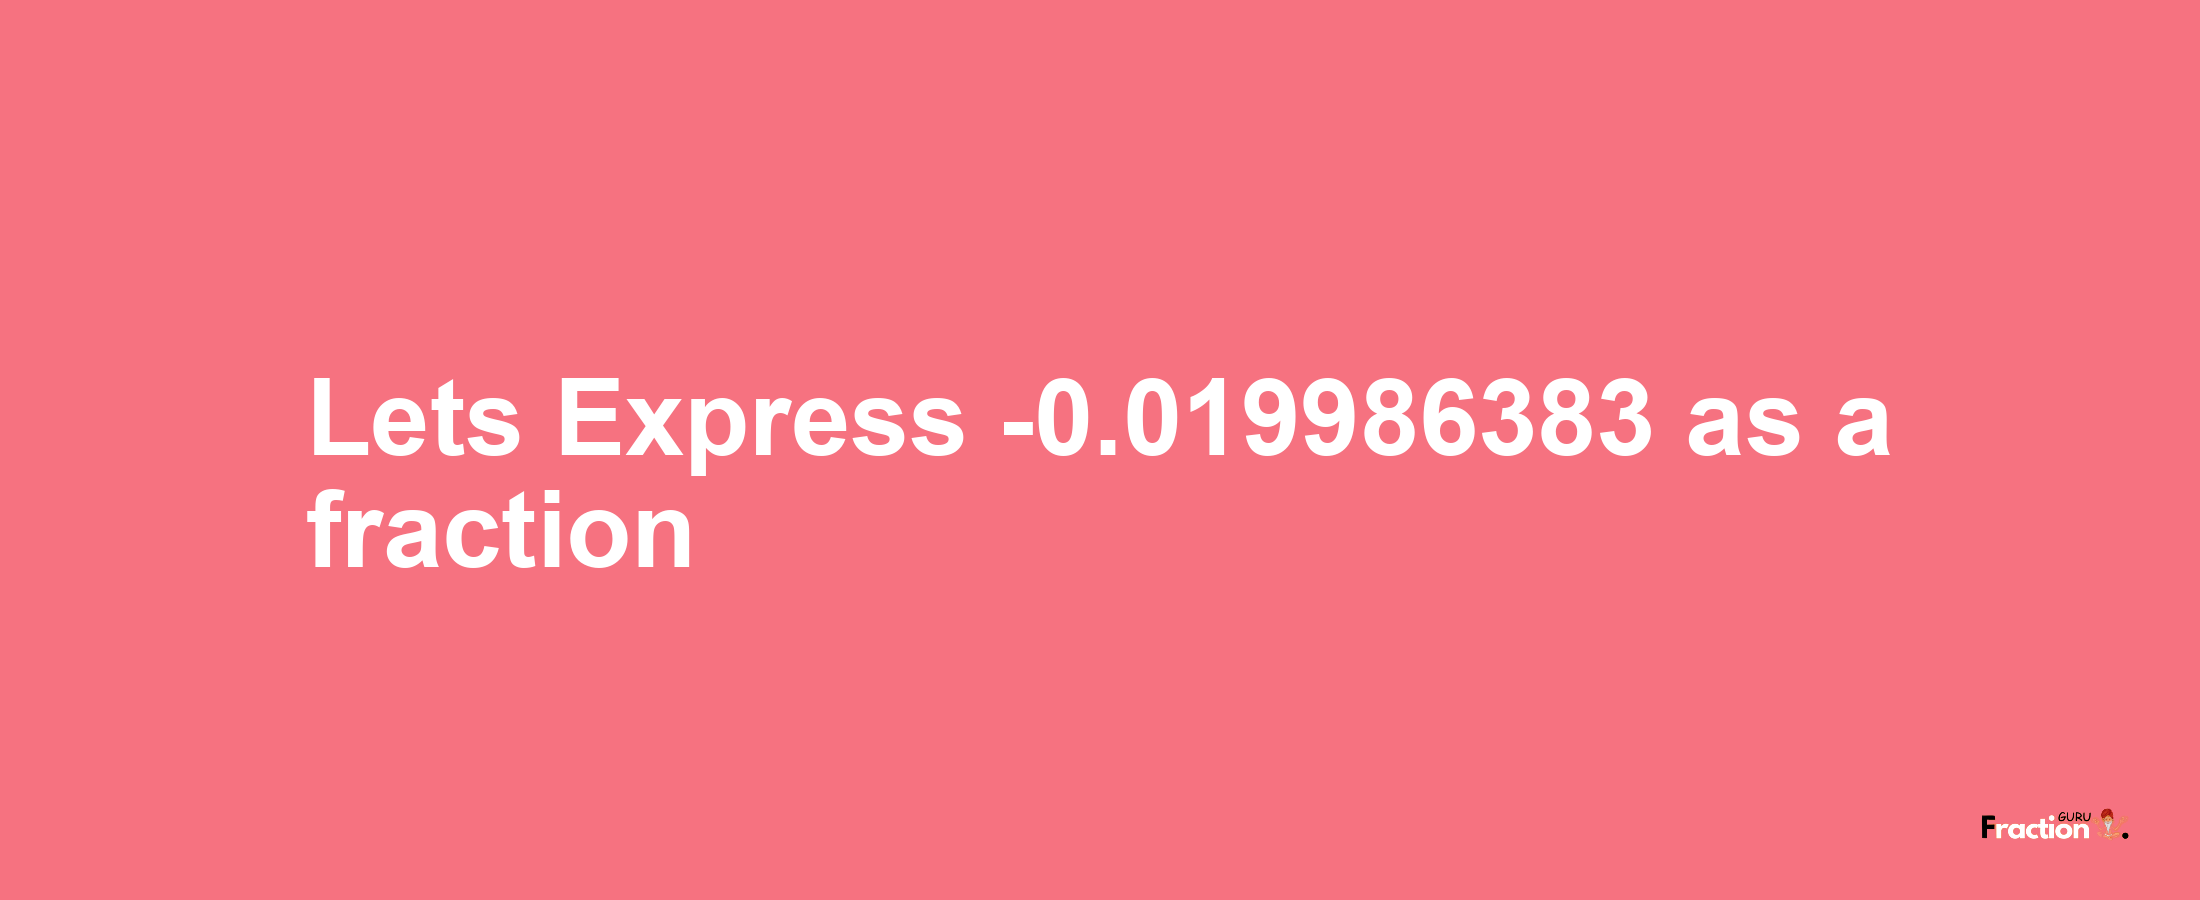 Lets Express -0.019986383 as afraction